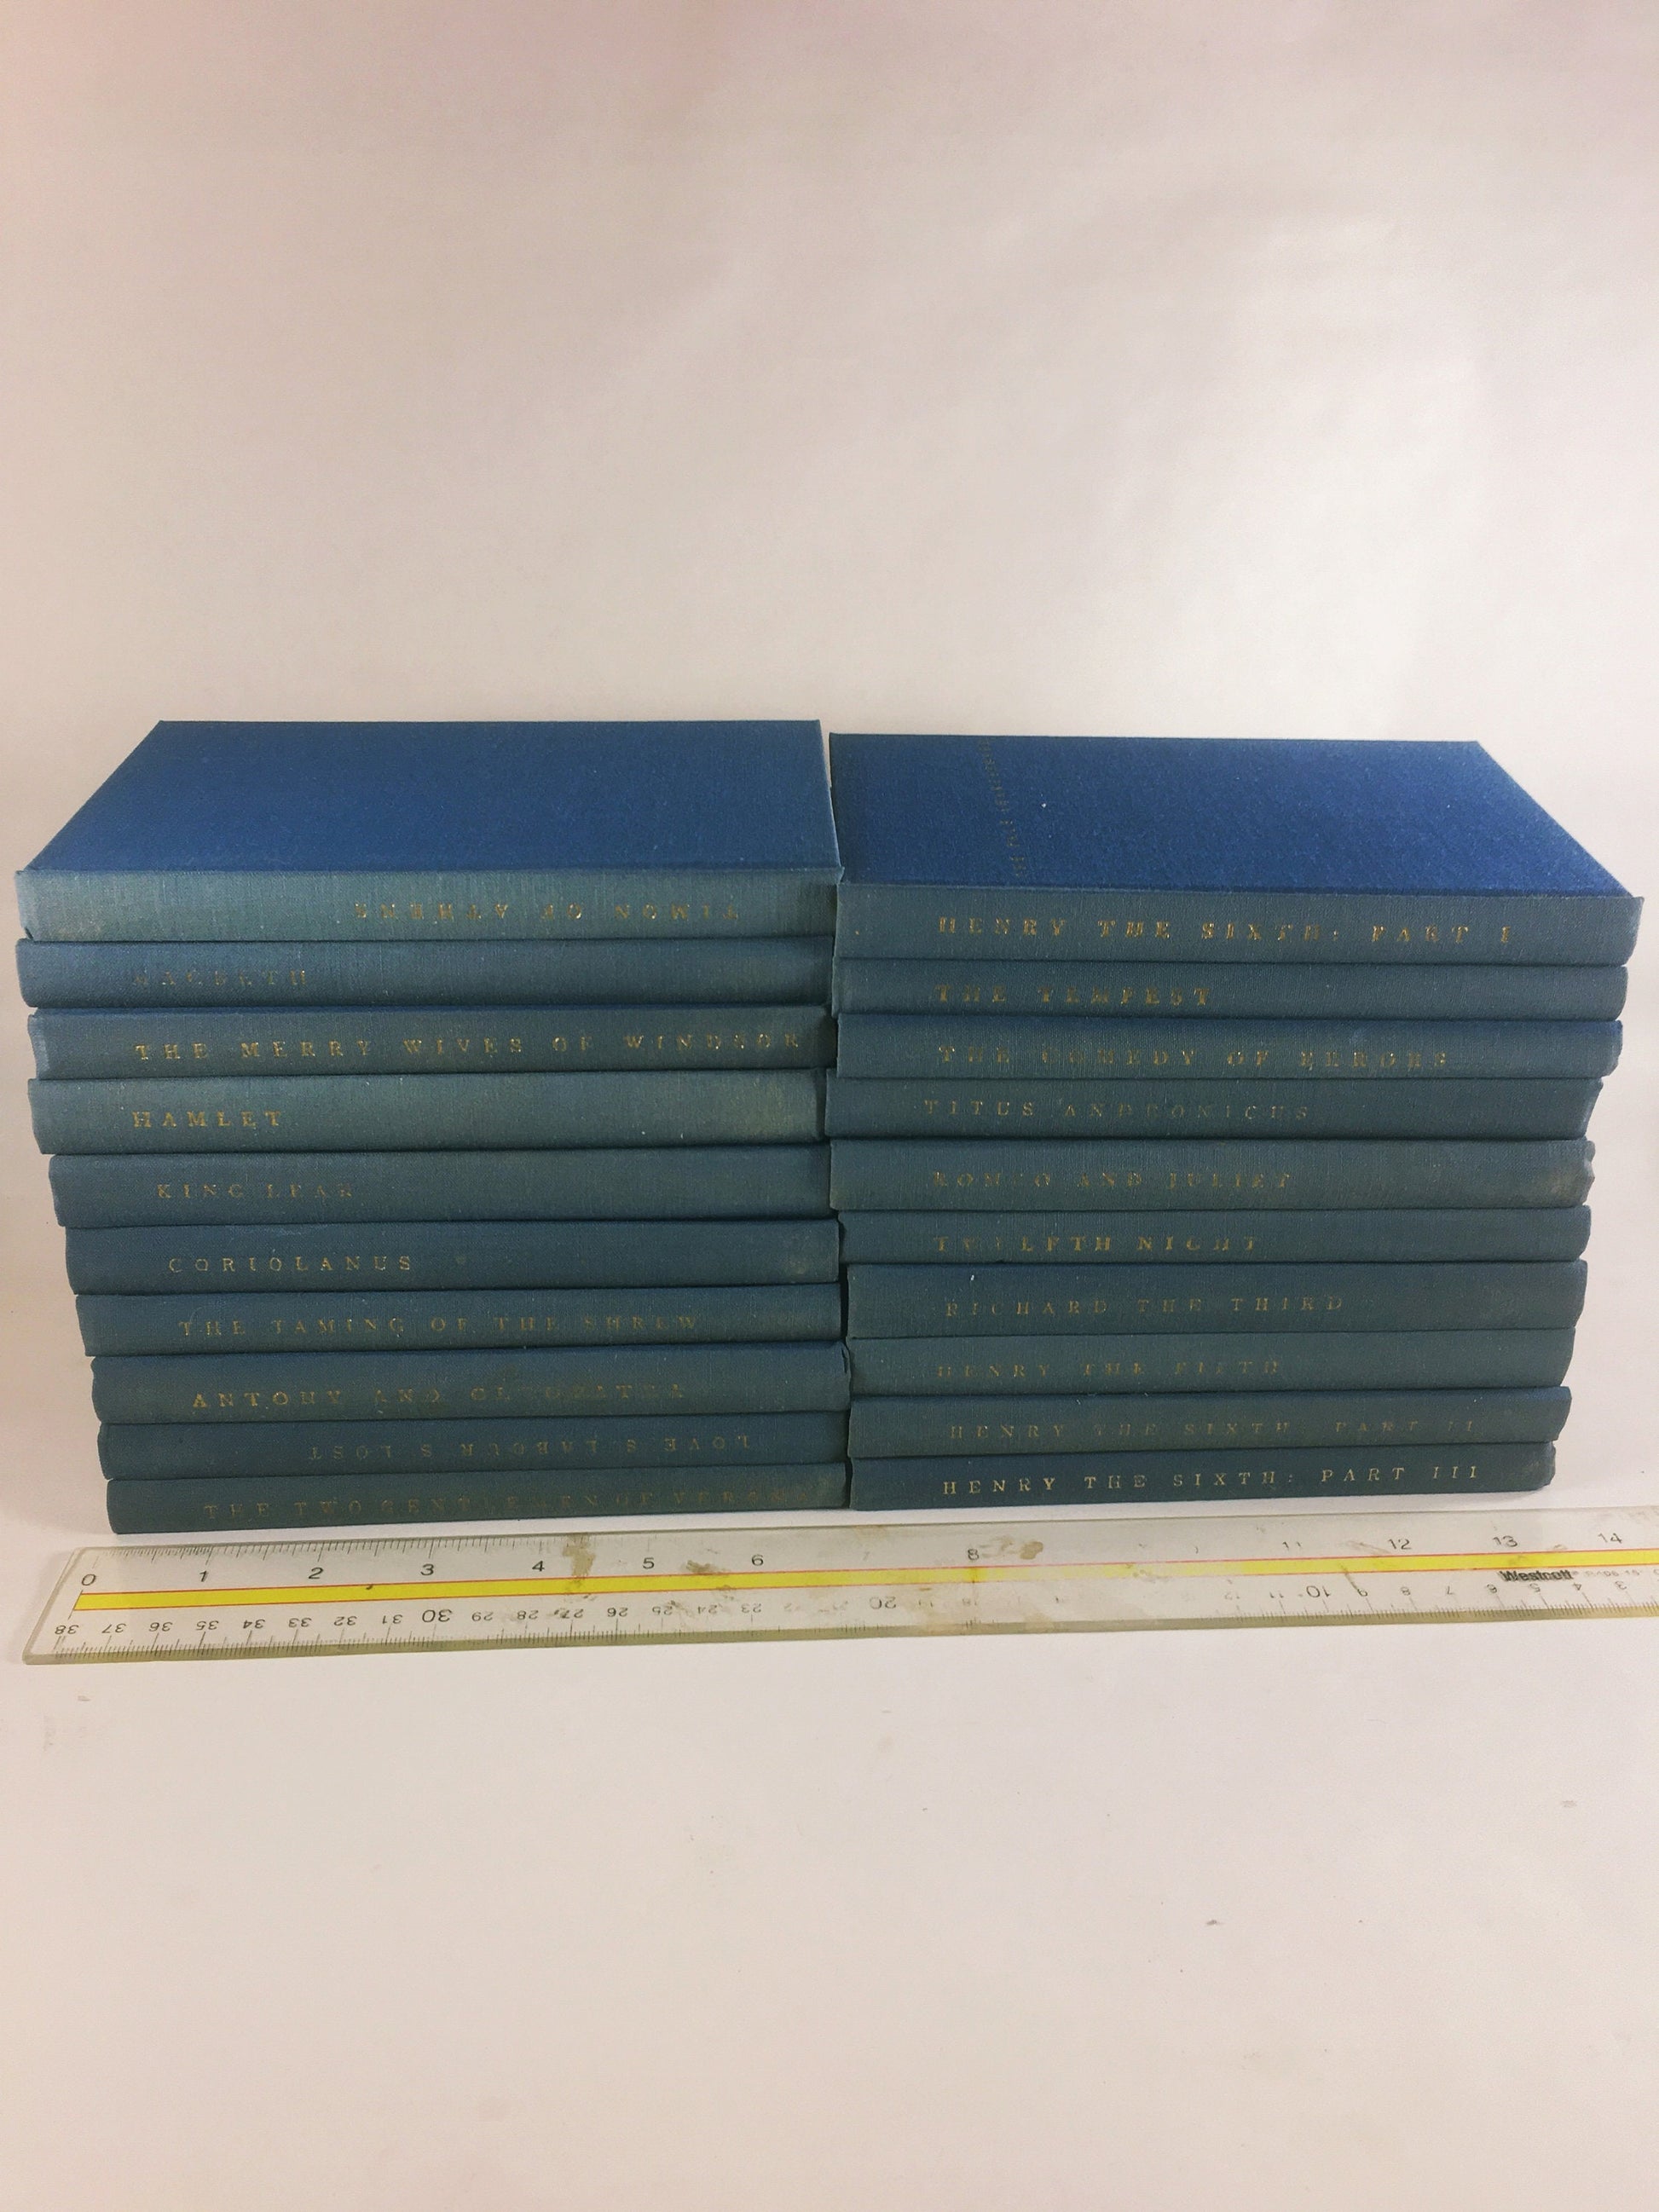 1956 Yale Shakespeare Blue book vintage books PICK ONE! Plays, poetry & sonnets King Lear Macbeth Romeo and Juliet Anthony and Cleopatra sky